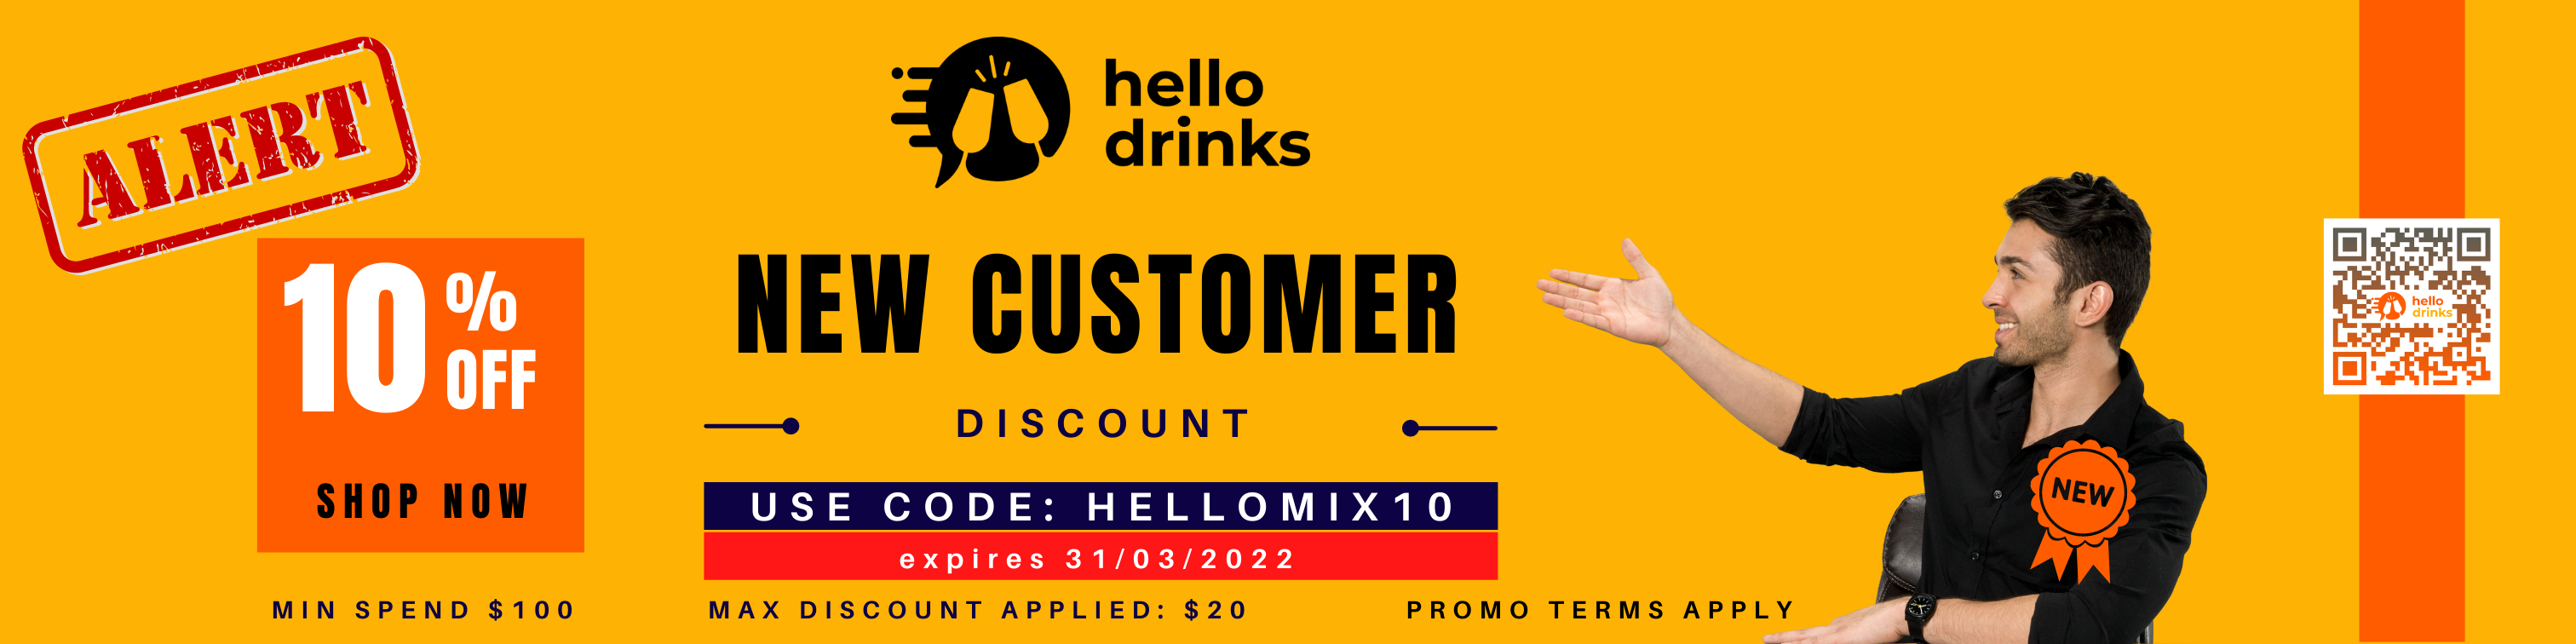 hello-drinks-new-customer-discount-alcohol-delivery-buy-now-pay-later-afterpay-sydney-melbourne